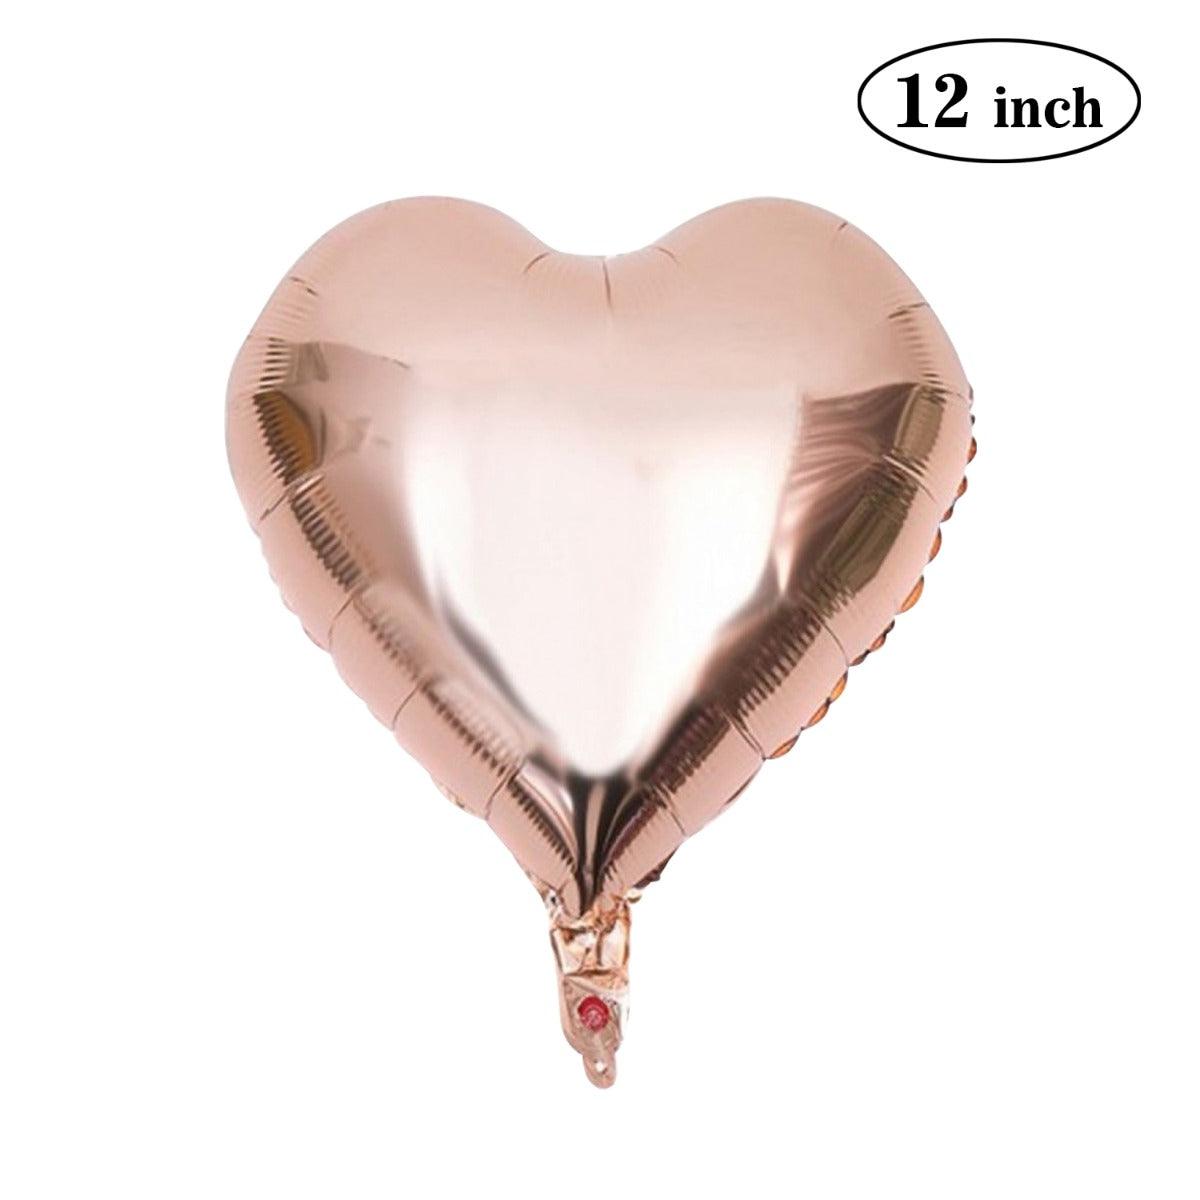 PartyCorp 12 Inch Rose Gold Heart Foil Balloon, 1 pc